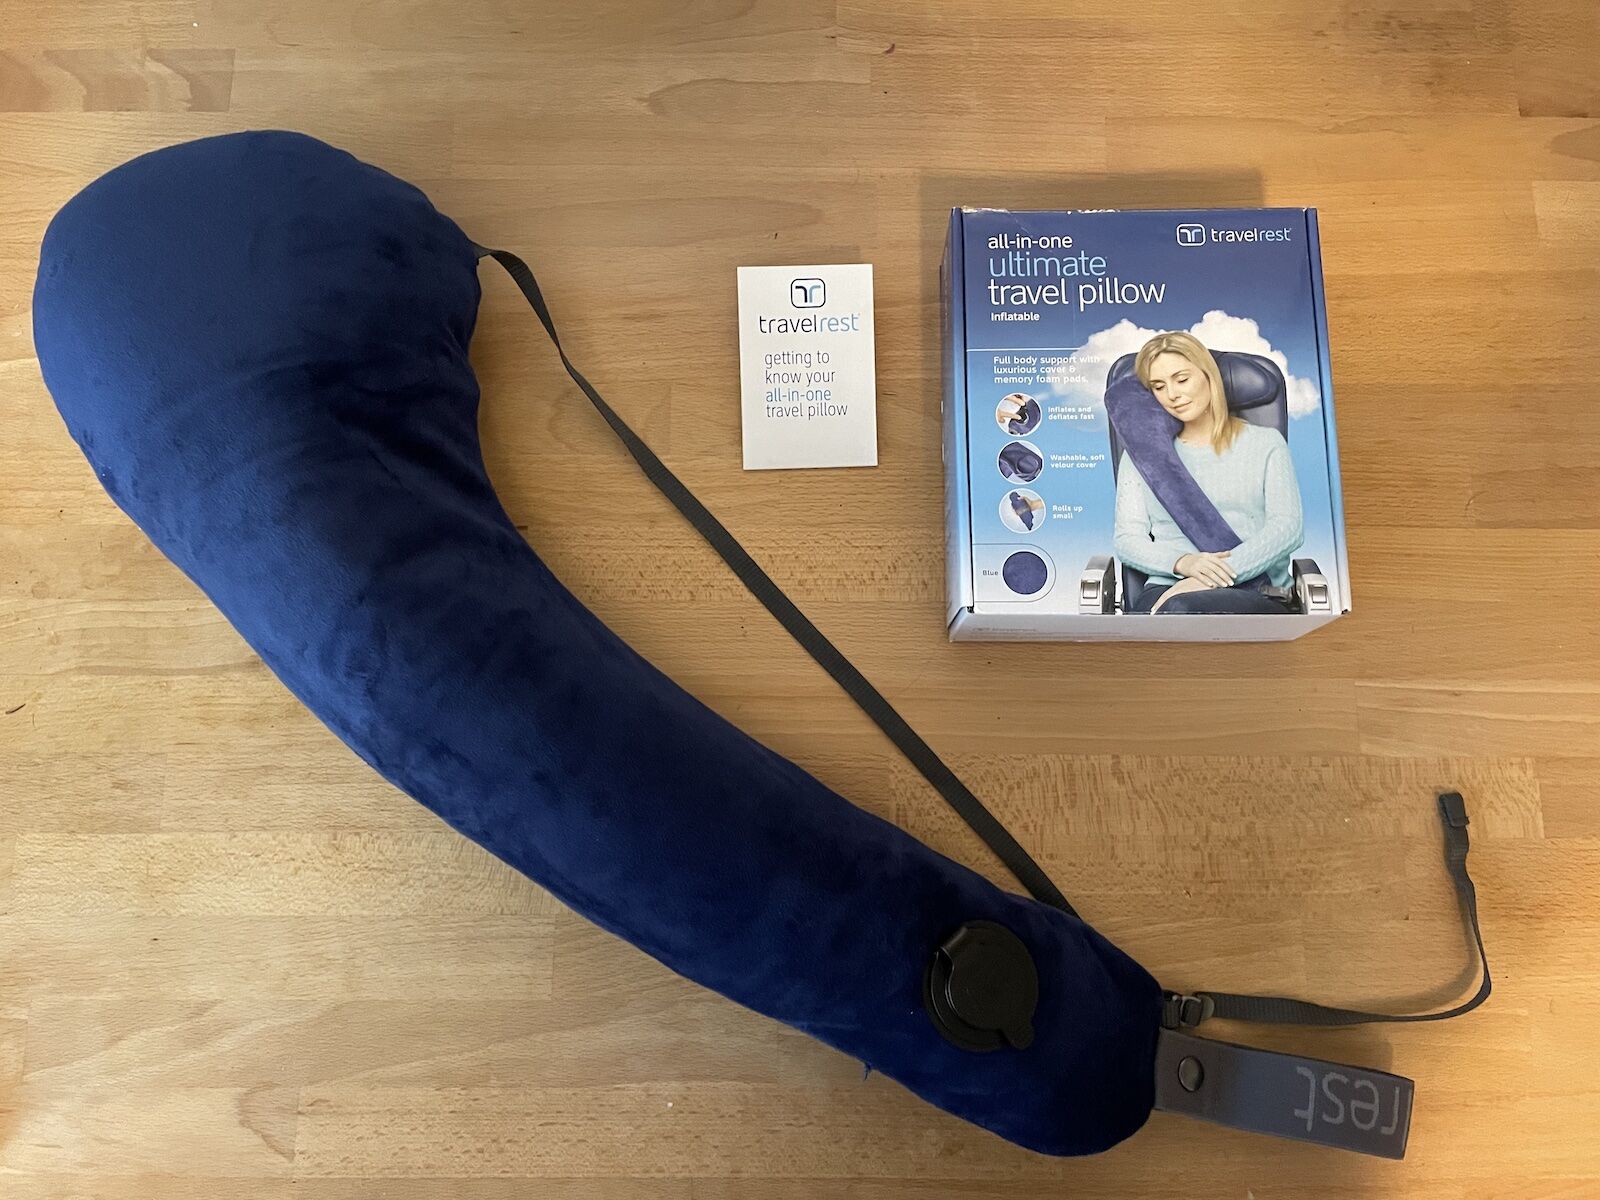 travelrest all-in-one travel pillow with box